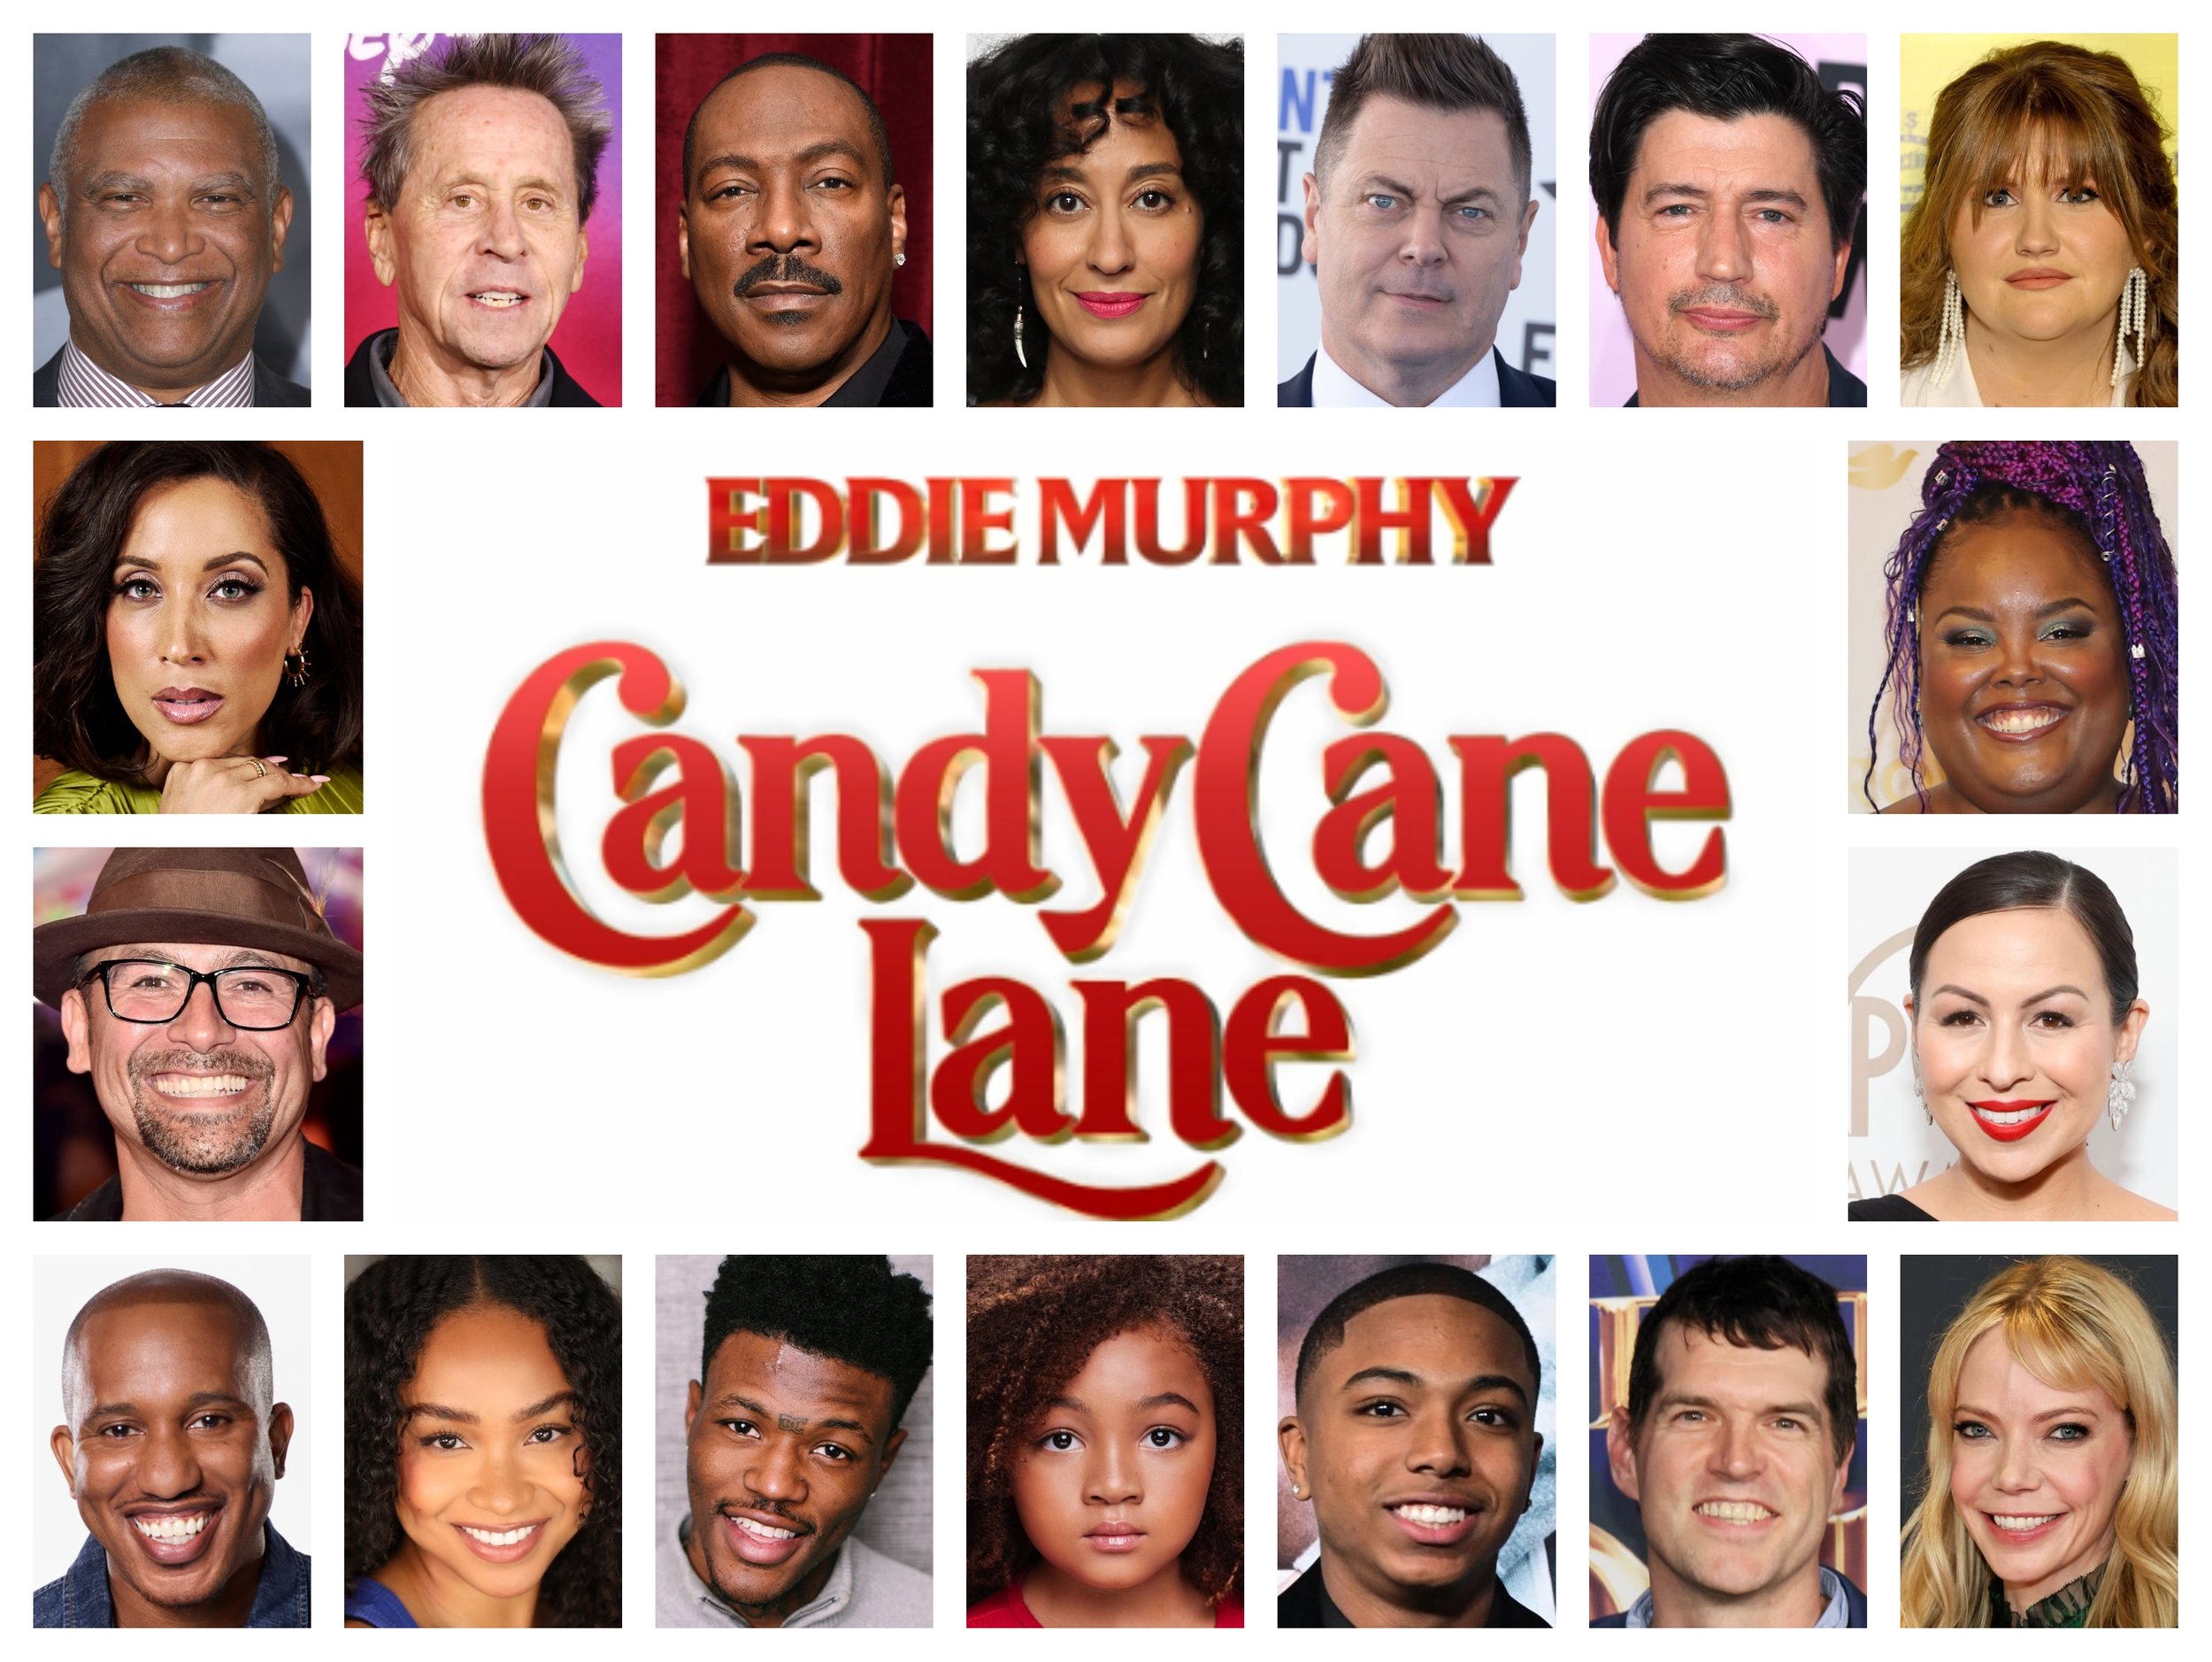 Prime Video to premiere Eddie Murphy’s Holiday film ‘Candy Cane Lane